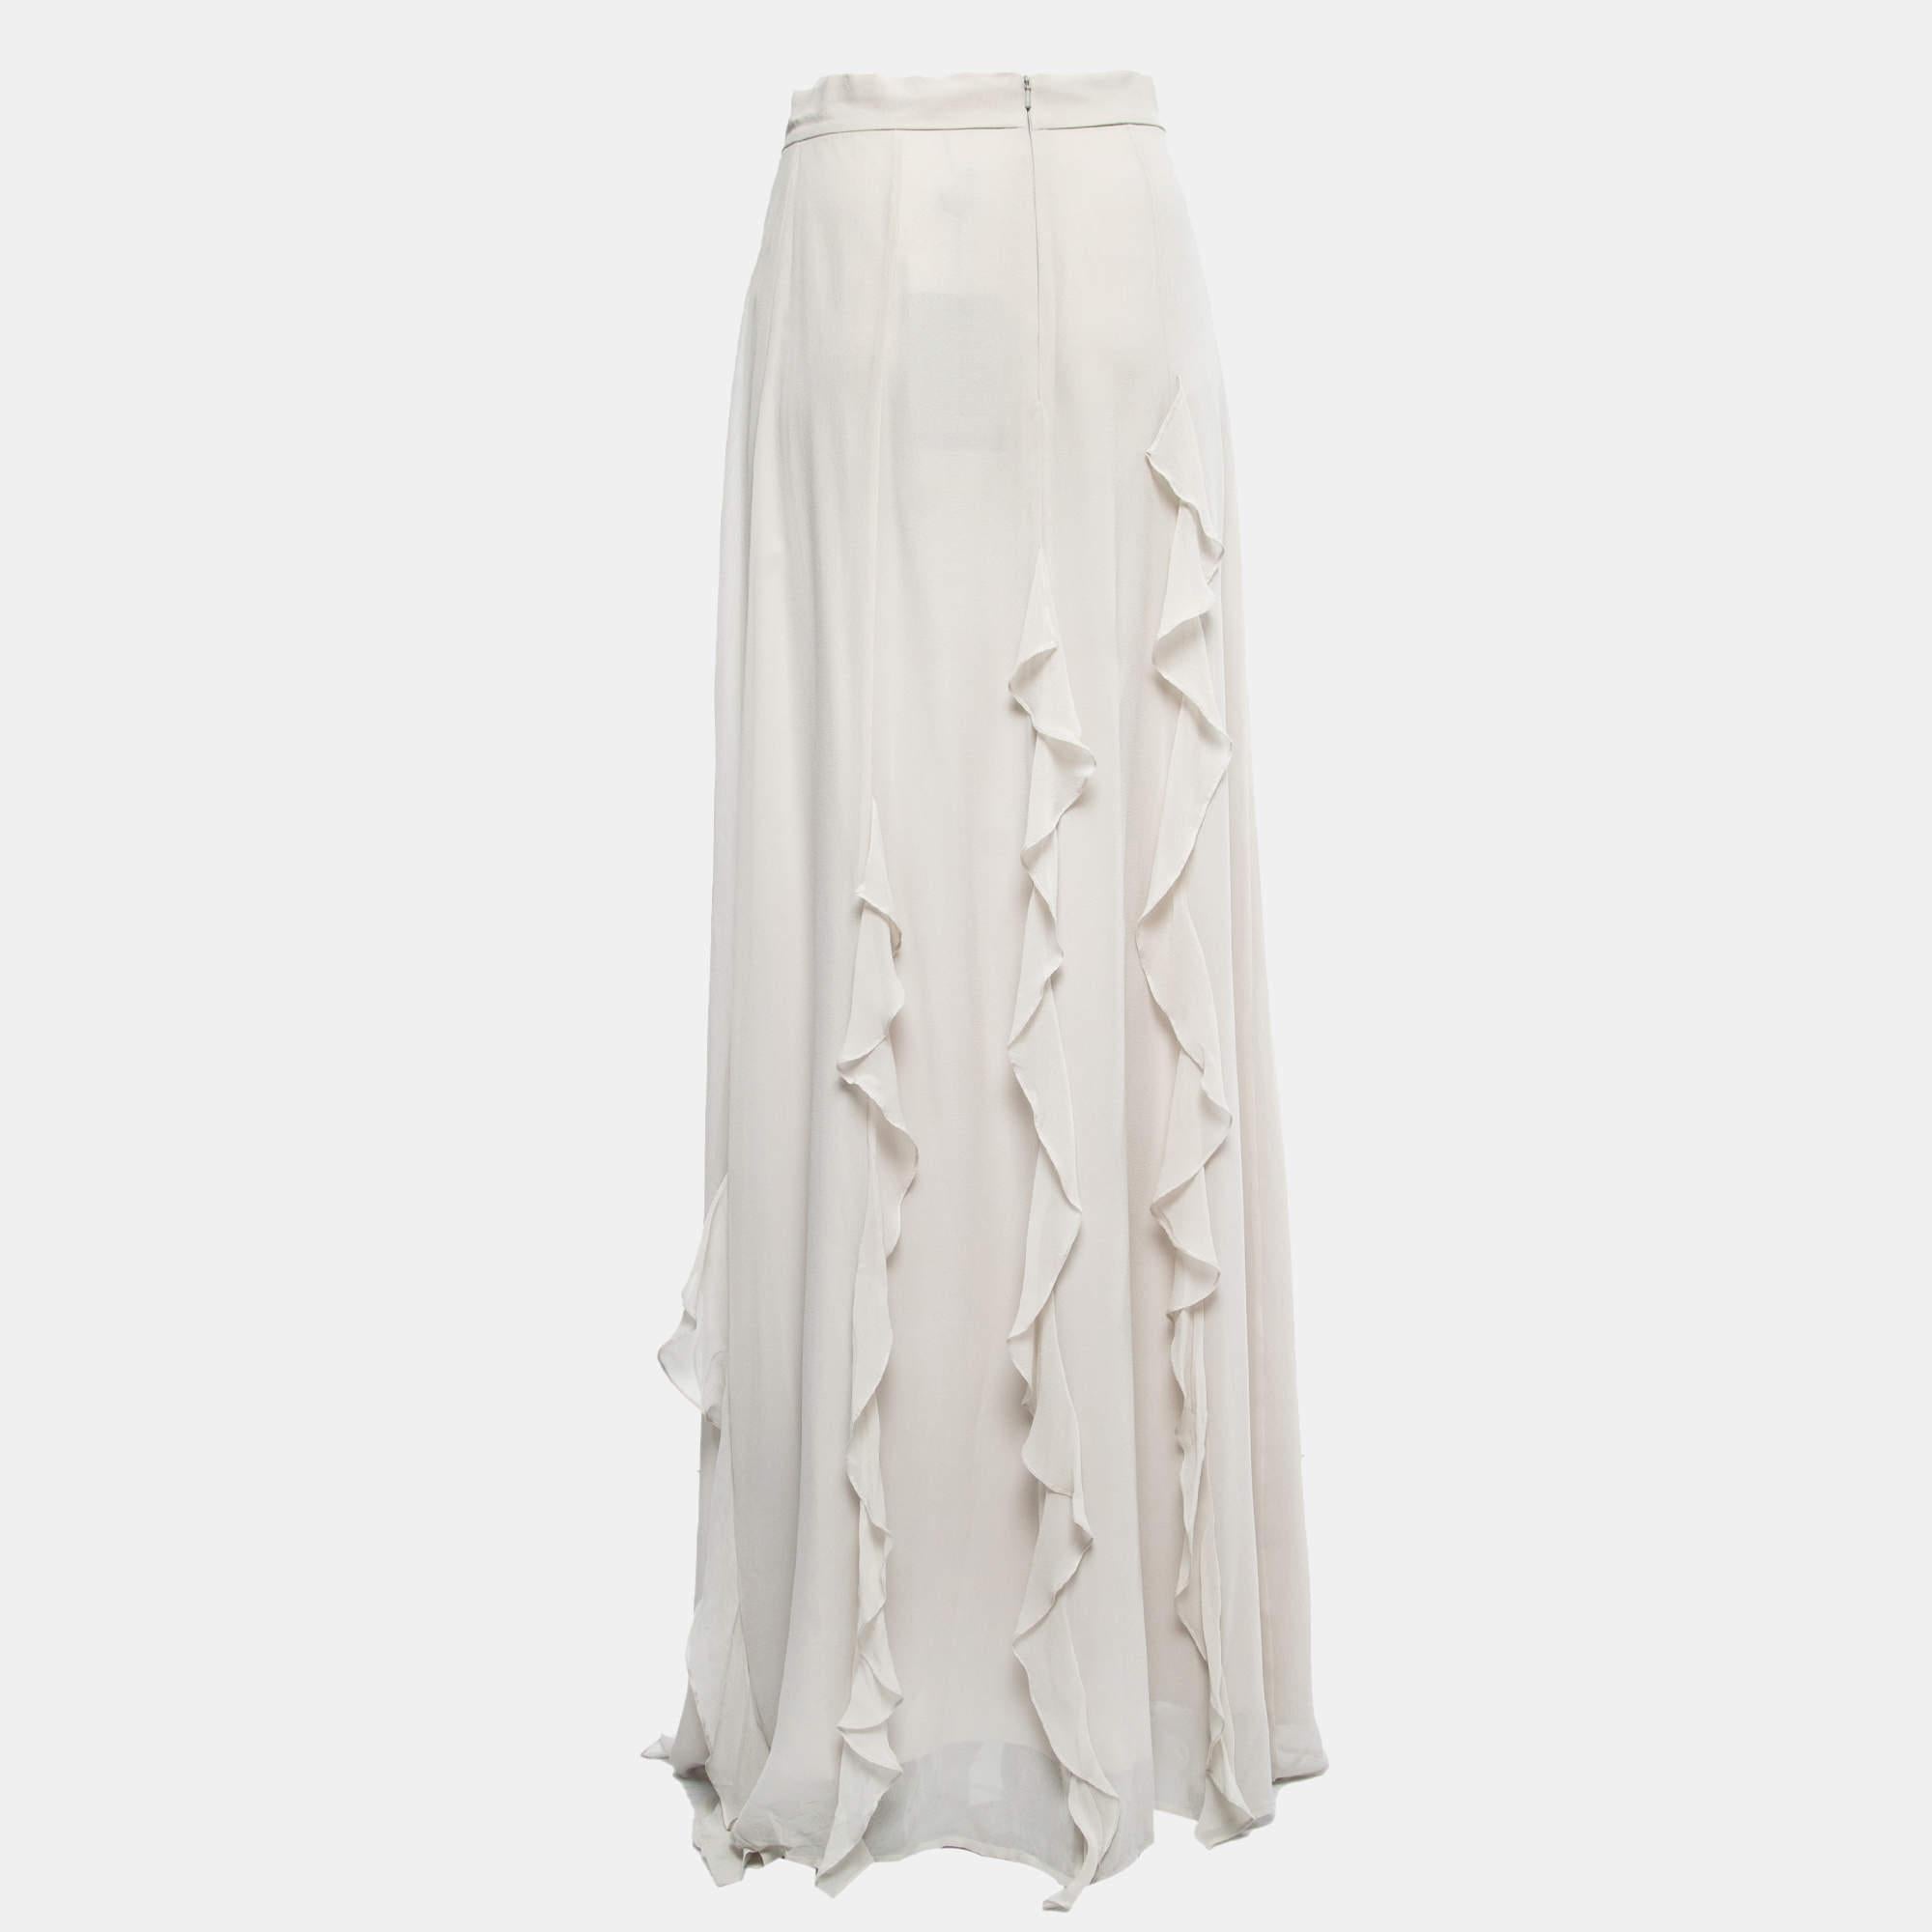 The Max Mara Serafin skirt is an elegant and luxurious fashion piece. Made from high-quality silk, it features delicate ruffles and a flowing maxi length. The skirt exudes femininity and sophistication, making it a perfect choice for special